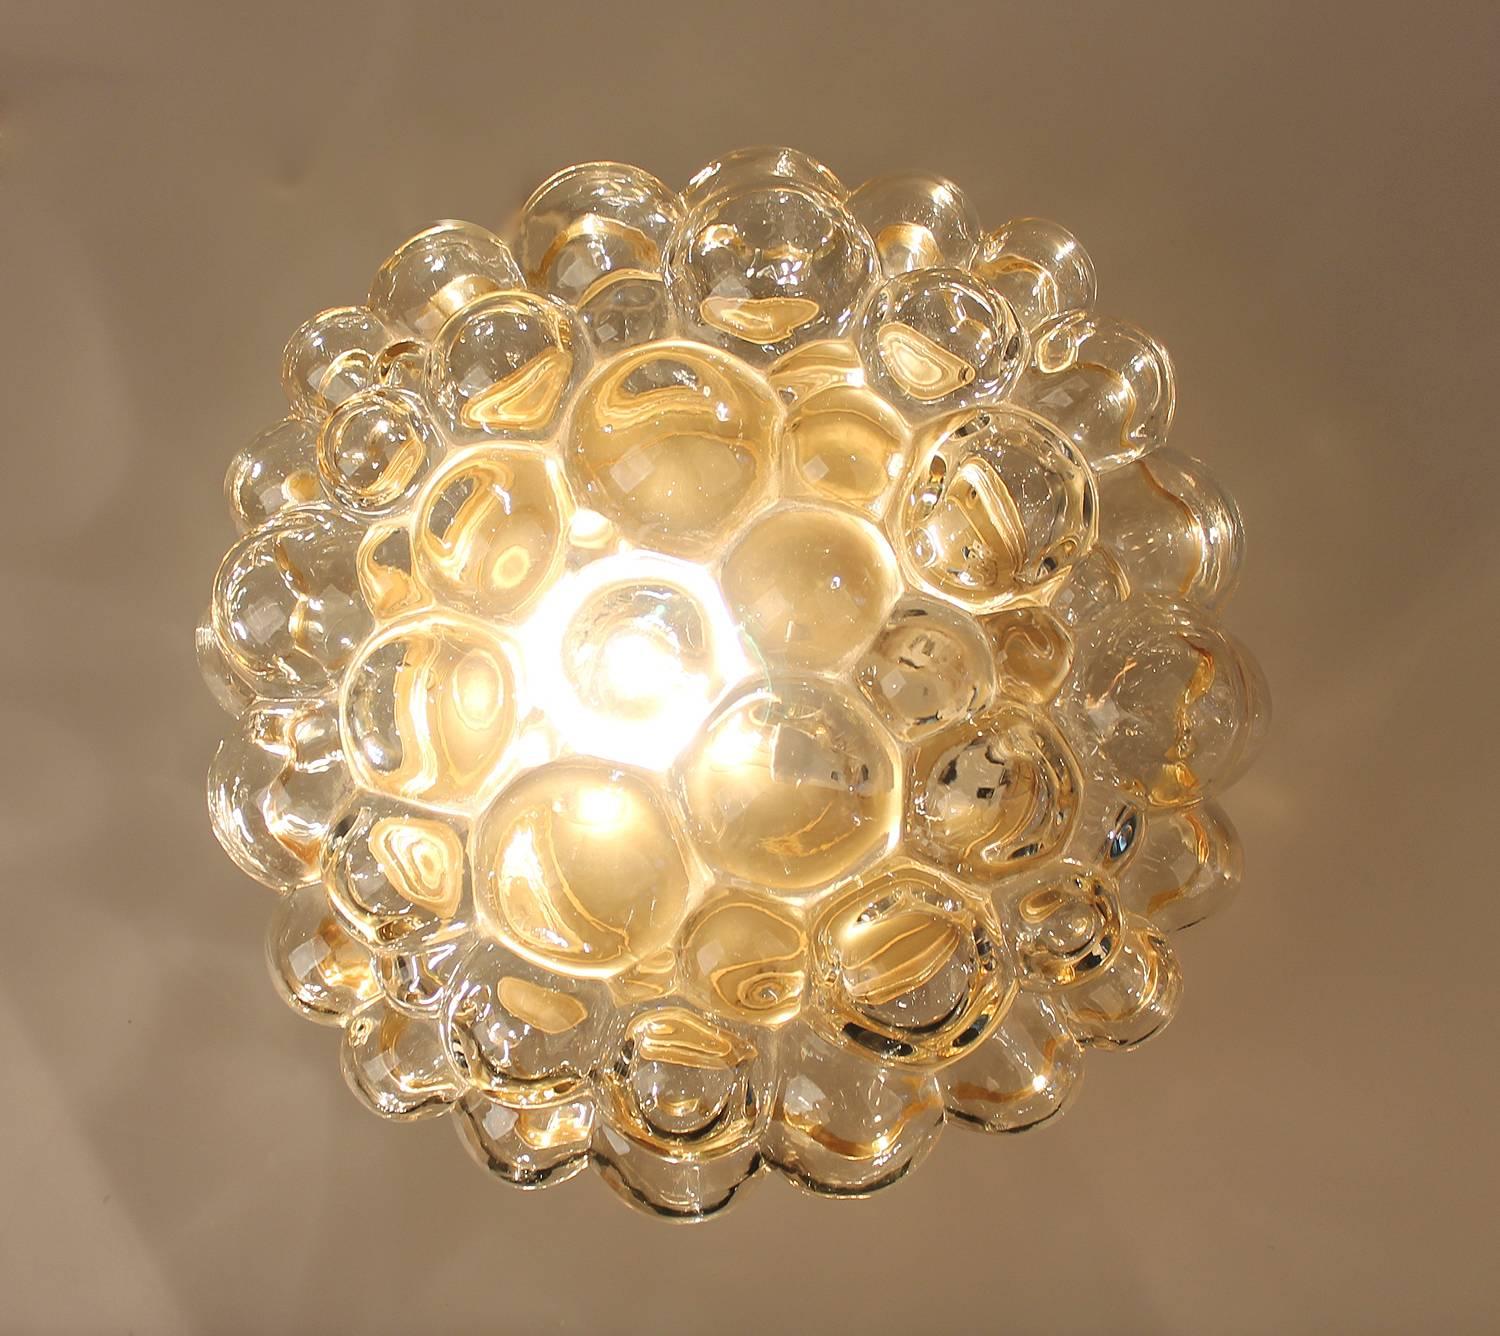 Large Limburg blown glass sconce / flush light, design by Helena Tynell, 
glass has slight amber color, bronze enameled base.
Dimensions:
H 5.52 in. x Dm 11.82 in.
H 14 cm x Dm 30 cm
Two standard bulbs up to 60 watts each.





 